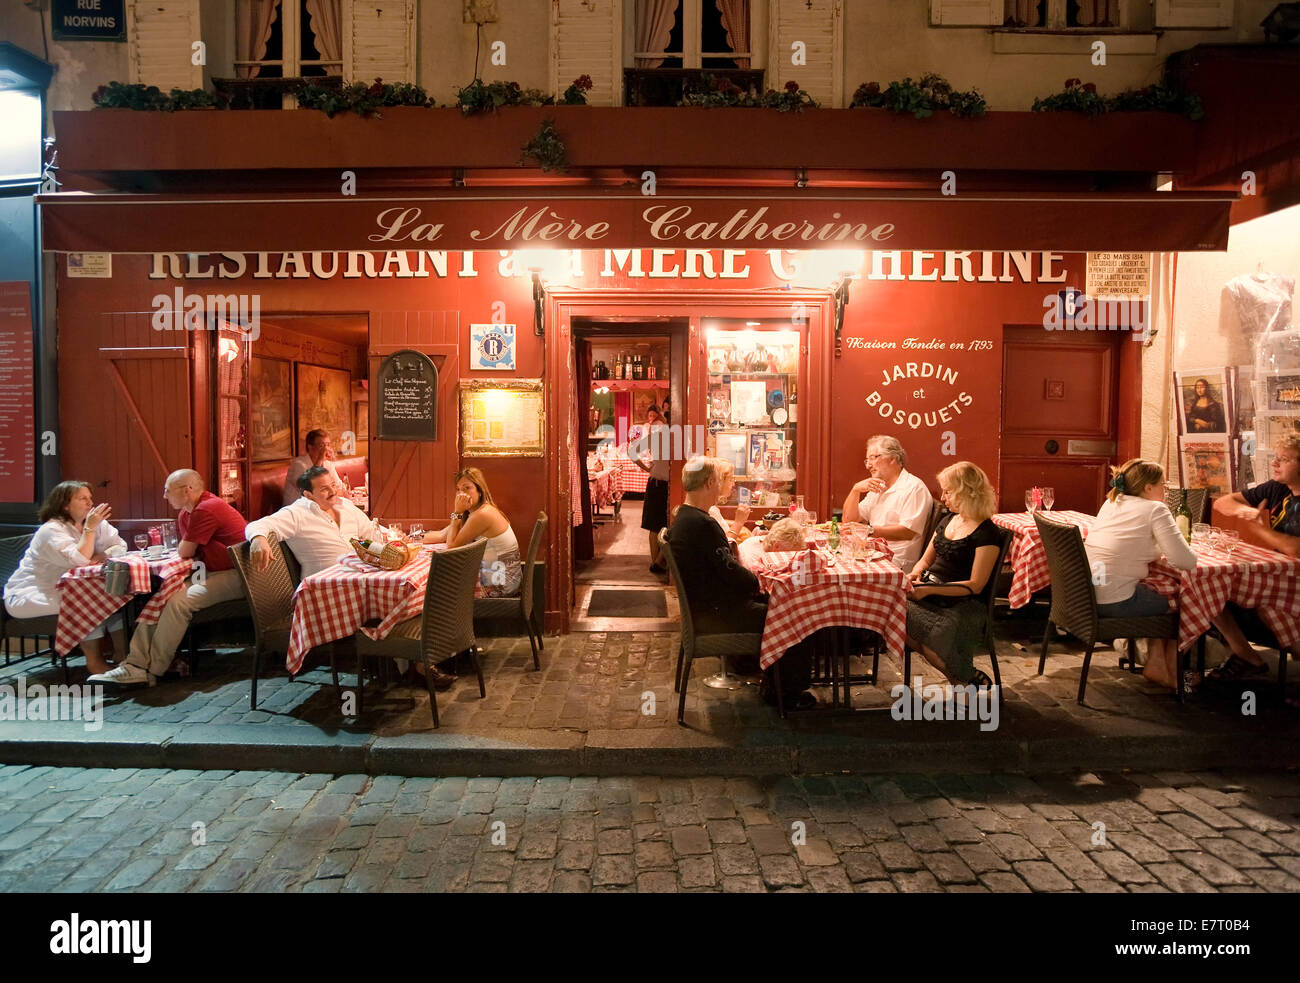 Montmartre restaurant; People eating outside at night at the Restaurant 'La Mere Catherine', Montmartre, Paris France Europe Stock Photo